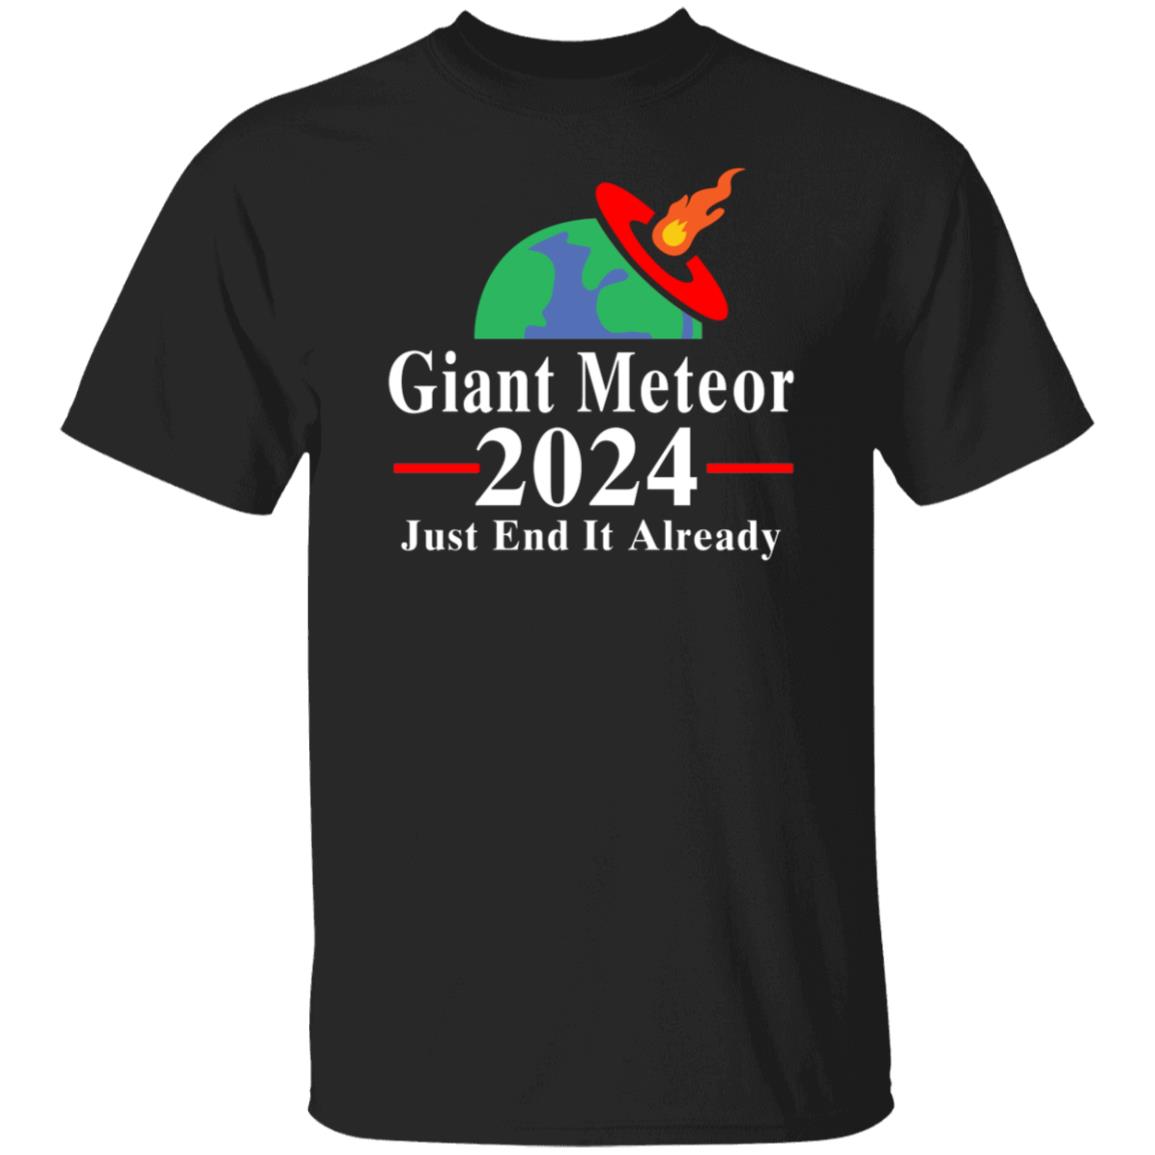 Giant Meteor 2024 Just End It Already Shirt